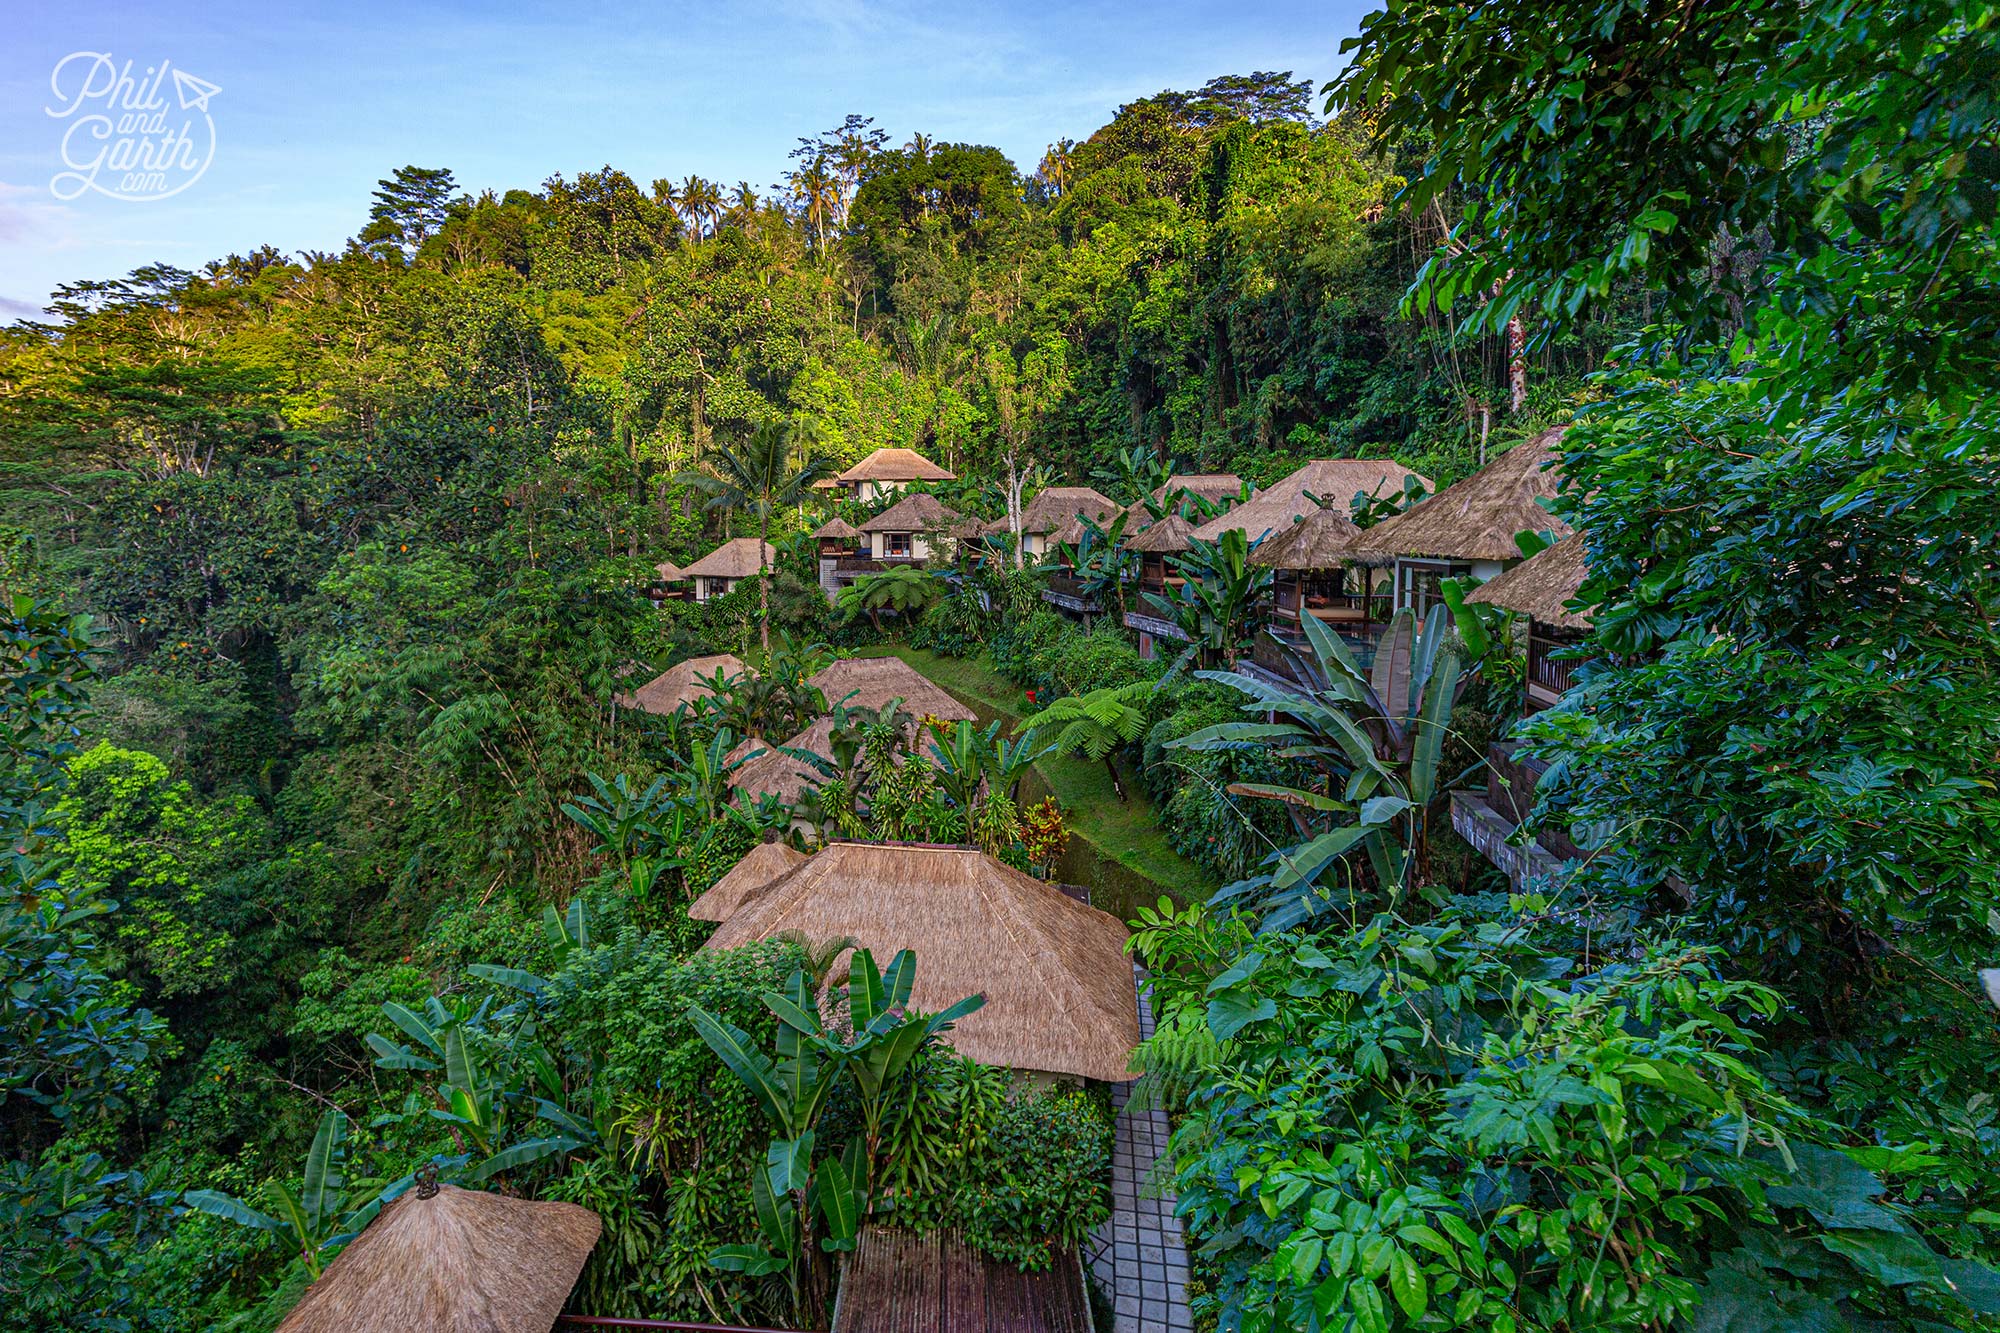 The Hanging Gardens of Bali villas are set on the hillside in the tropical jungle